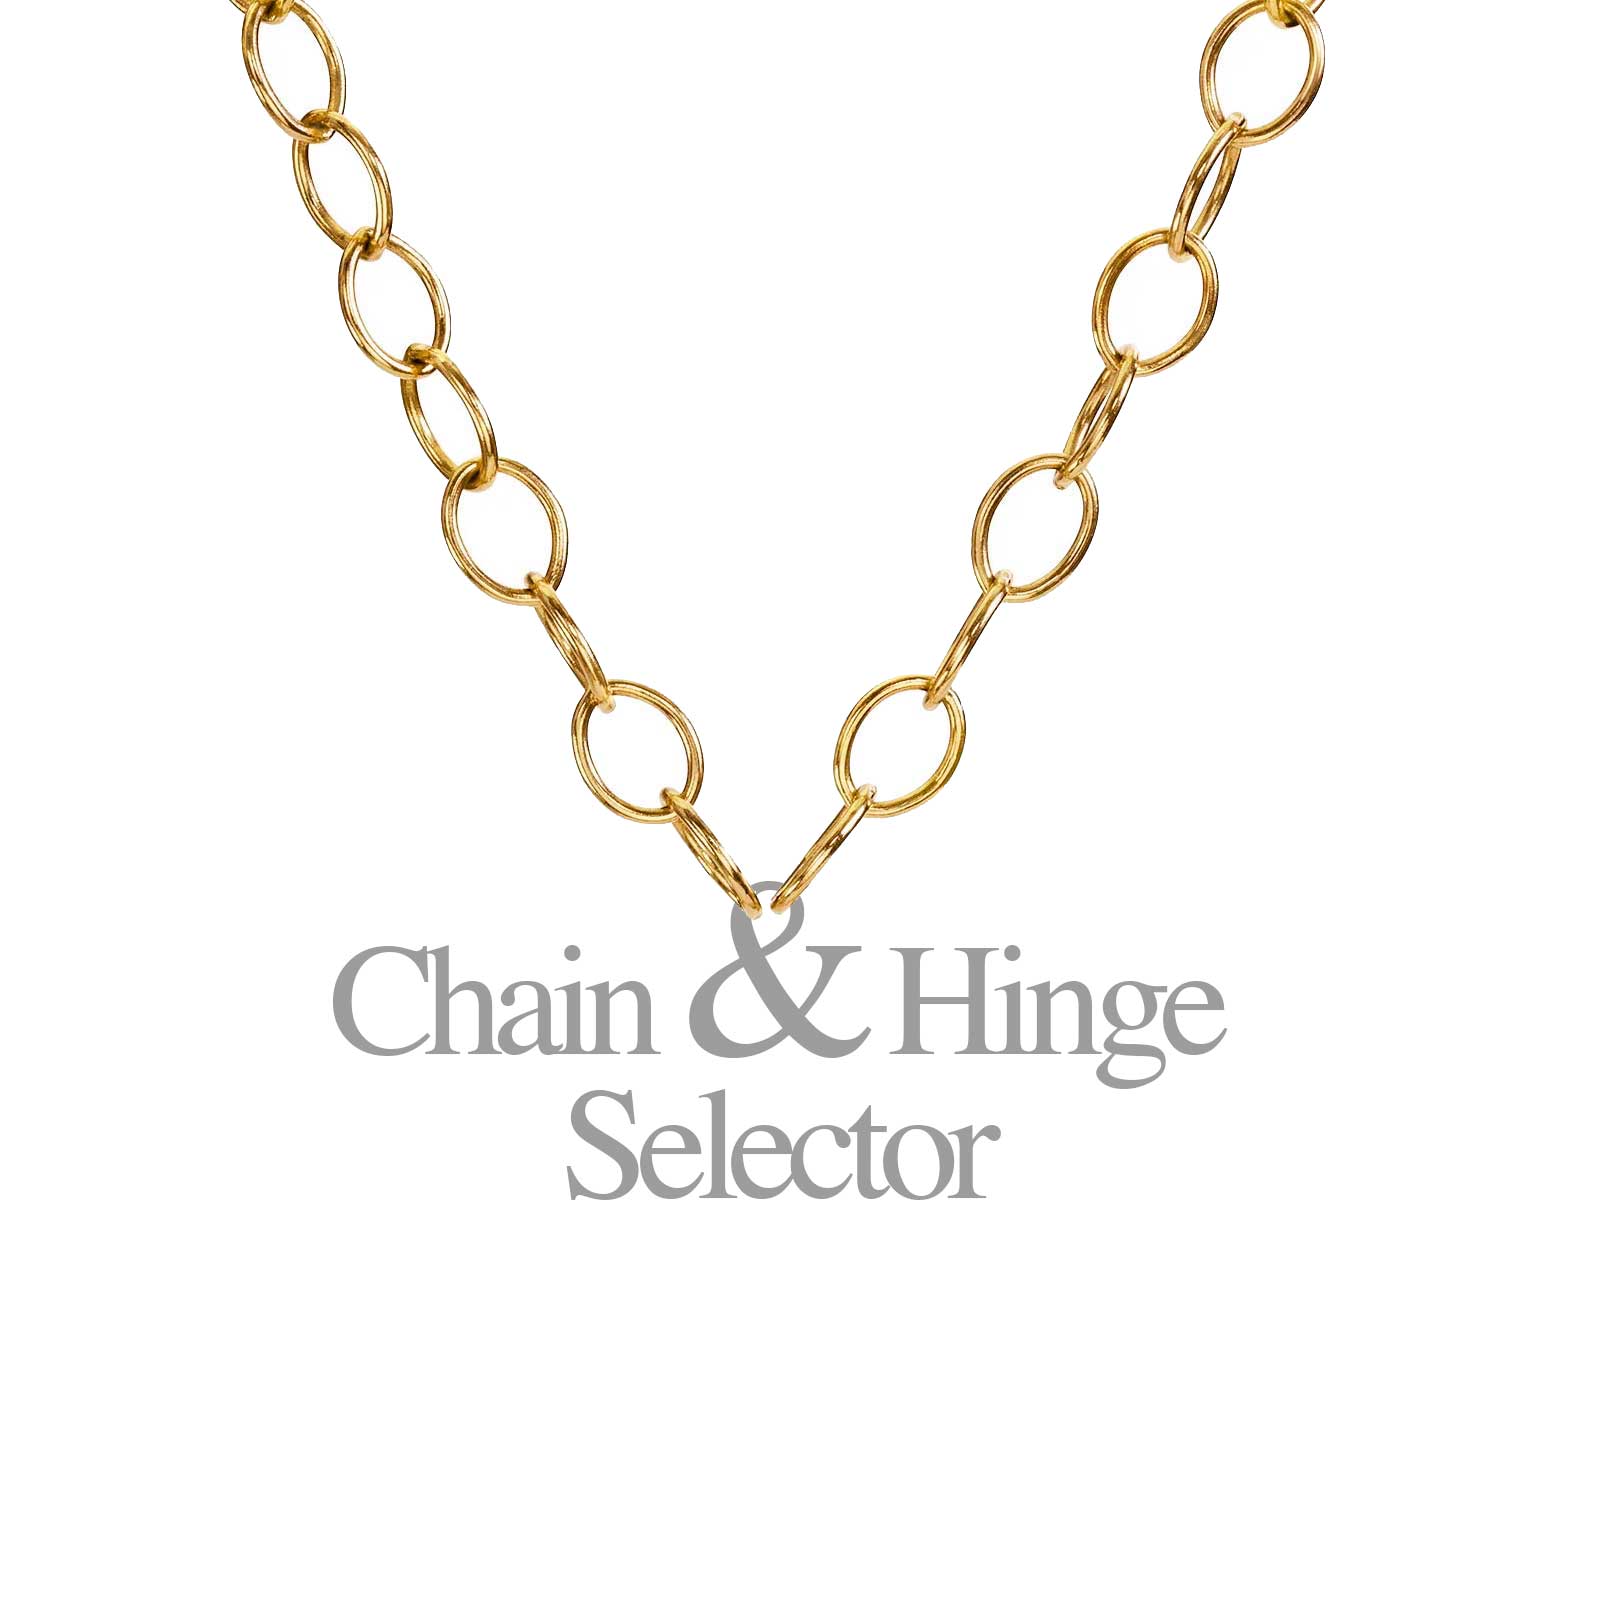 HEATHER B. MOORE 6.3mm Solid 14k Yellow Gold Chain and Hinge